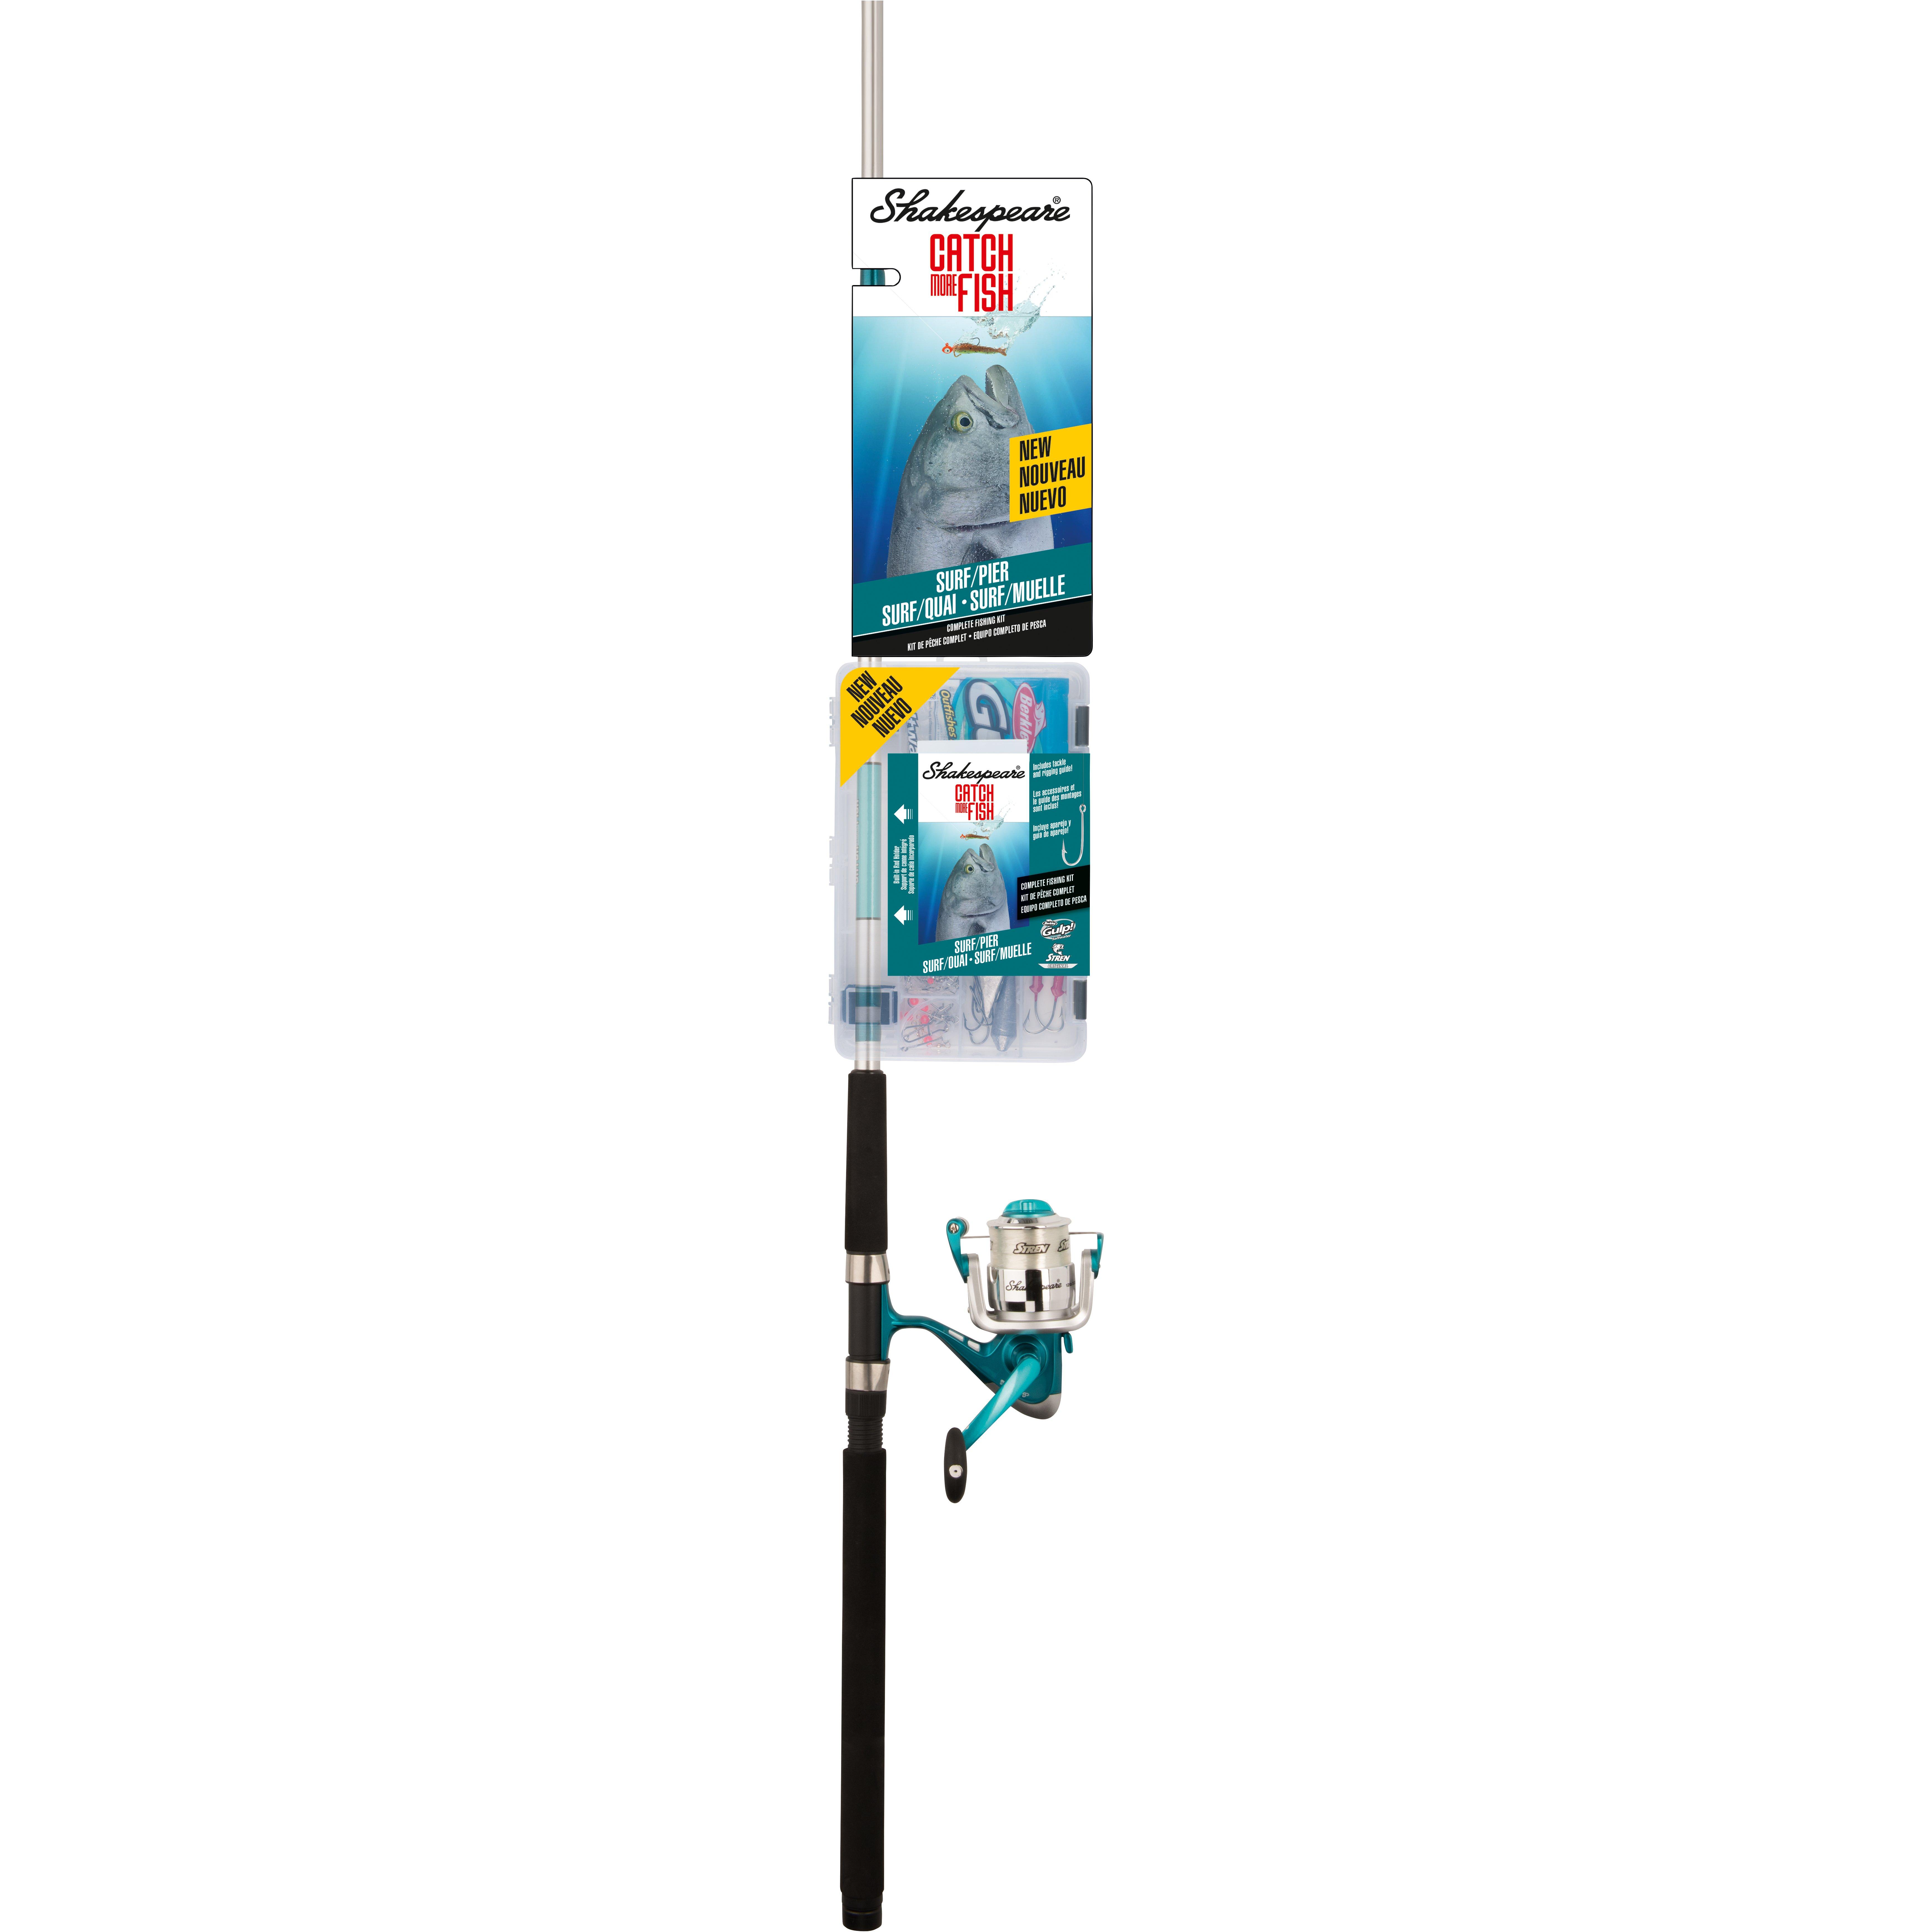 https://op2.0ps.us/original/opplanet-shakespeare-catch-more-fish-surf-pier-8-ft-spinning-5-1-1-right-left-50-8ft-rod-length-medium-power-2-pieces-rod-white-teal-cmf2surfpier8ft-main